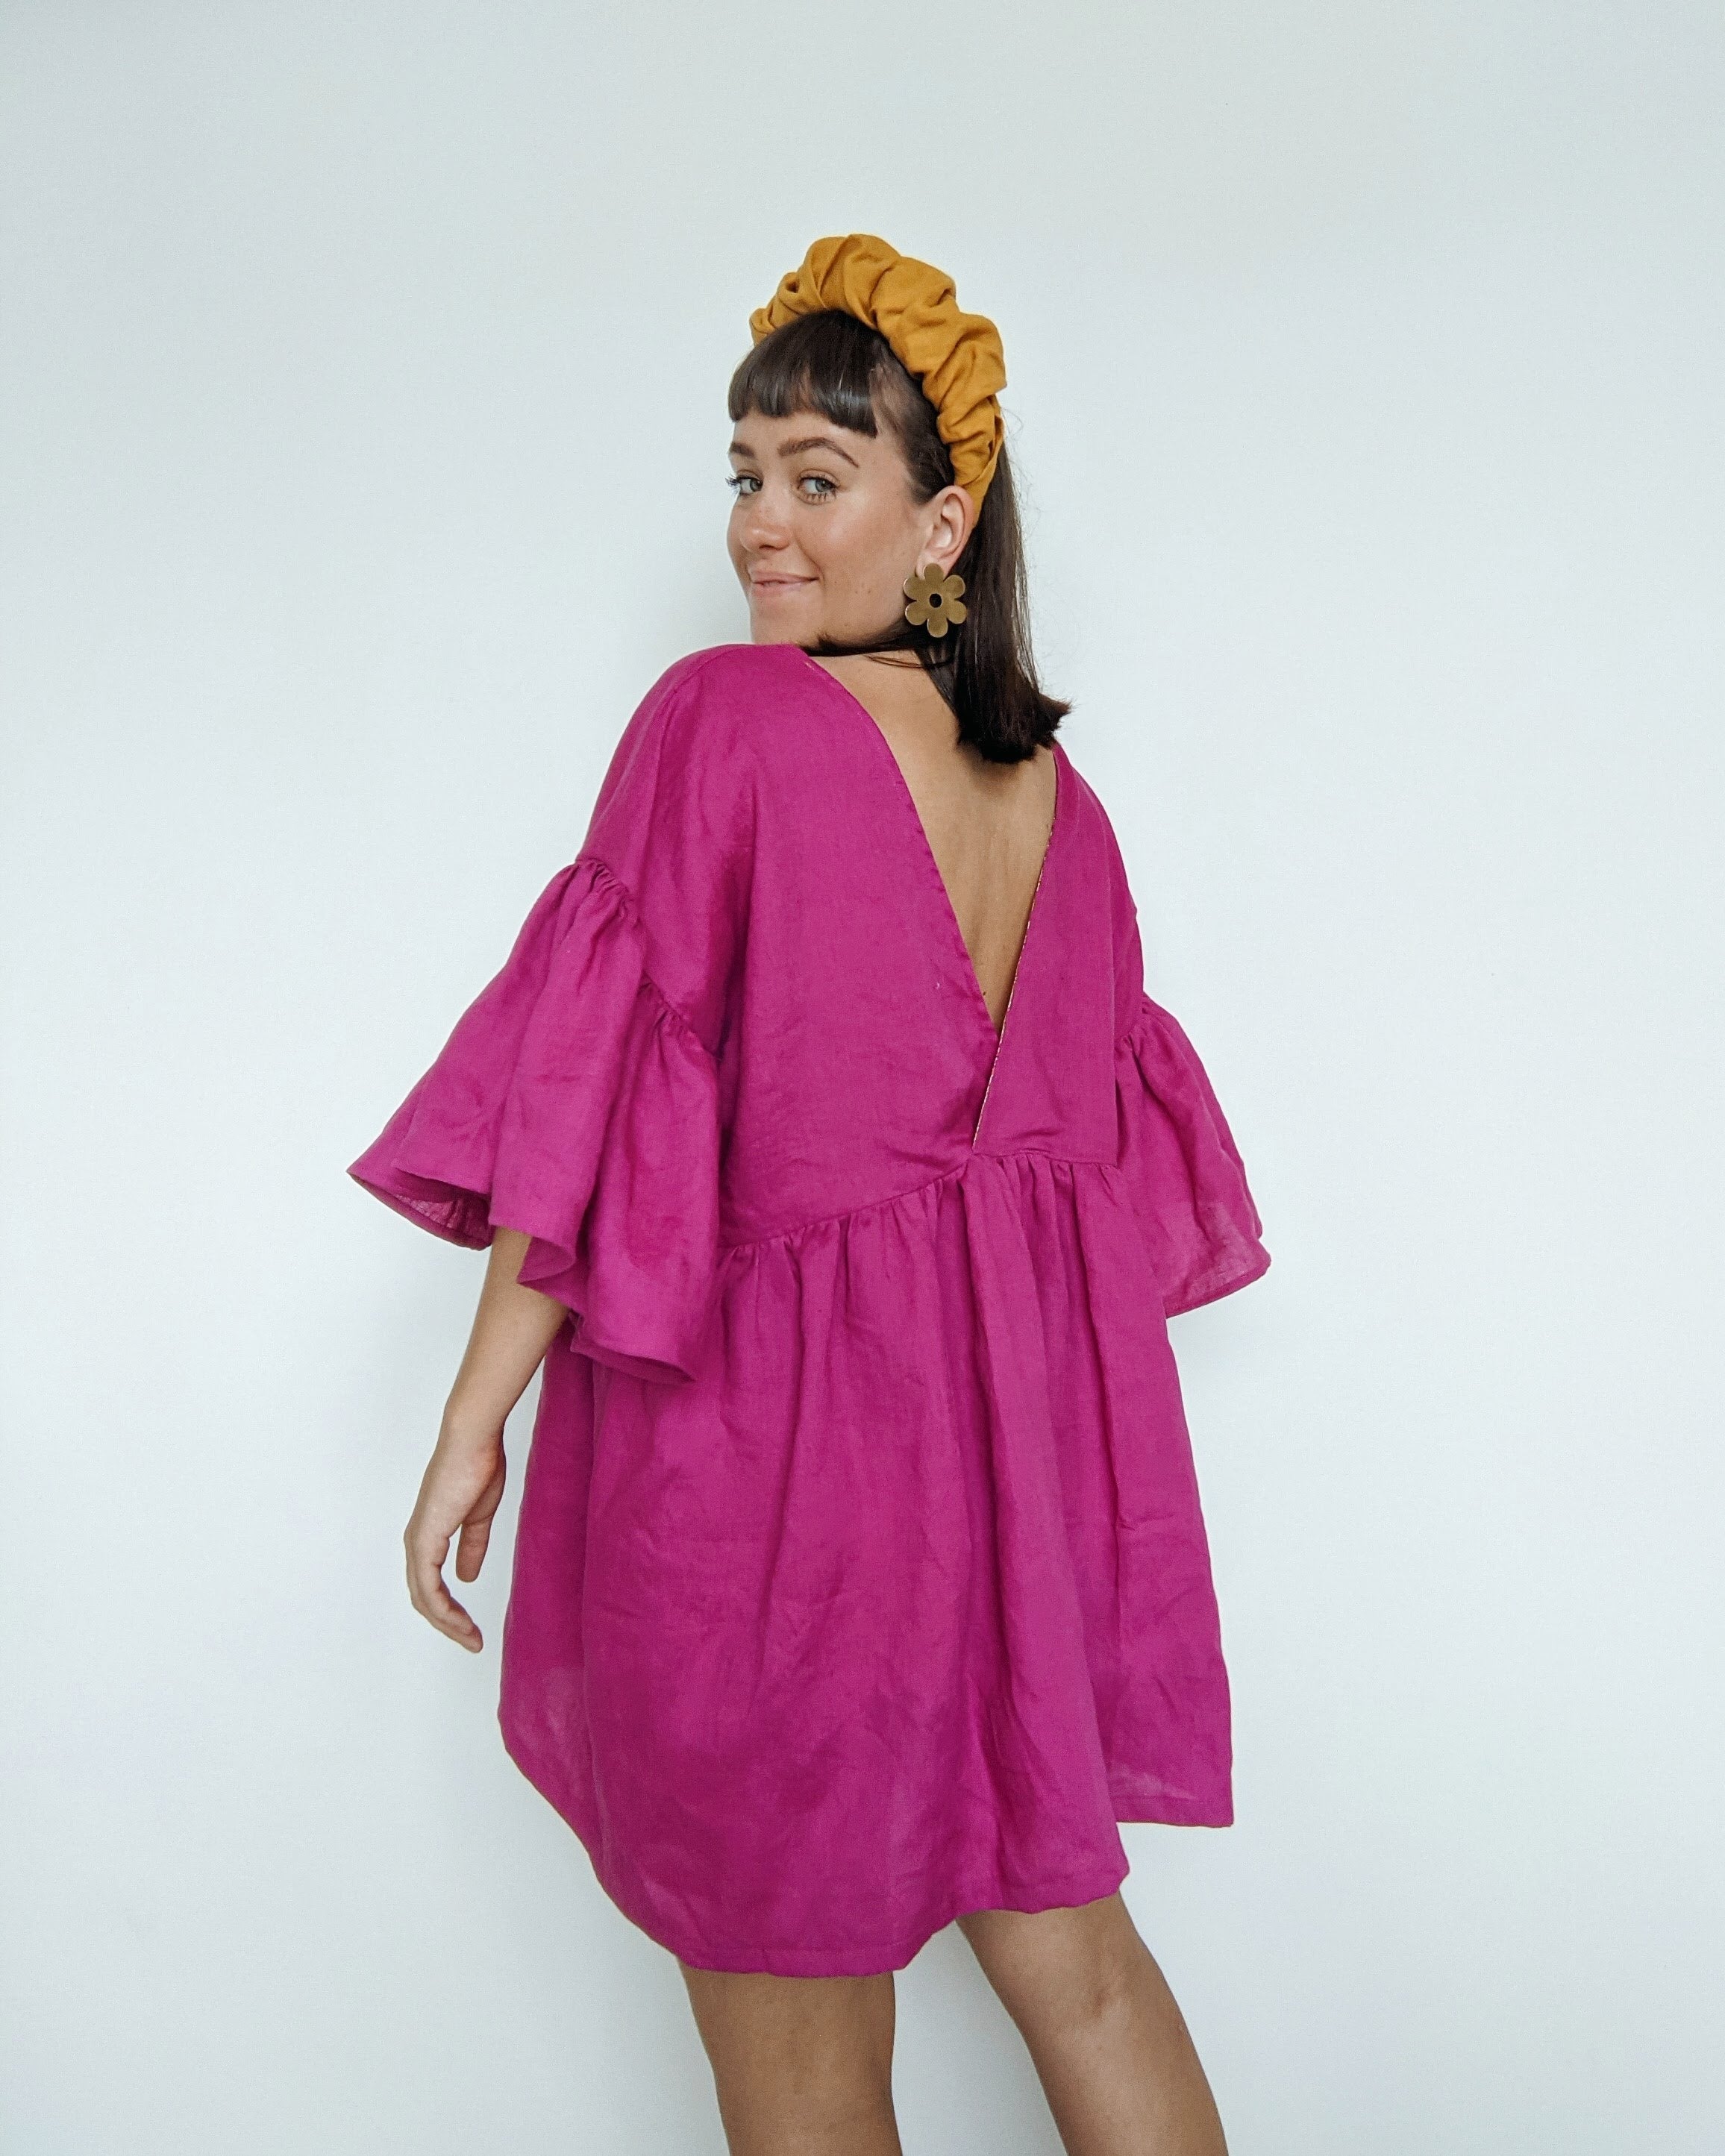 Daisy stands with her back facing to show the v back on her magenta linen Maya ruffle dress hack.